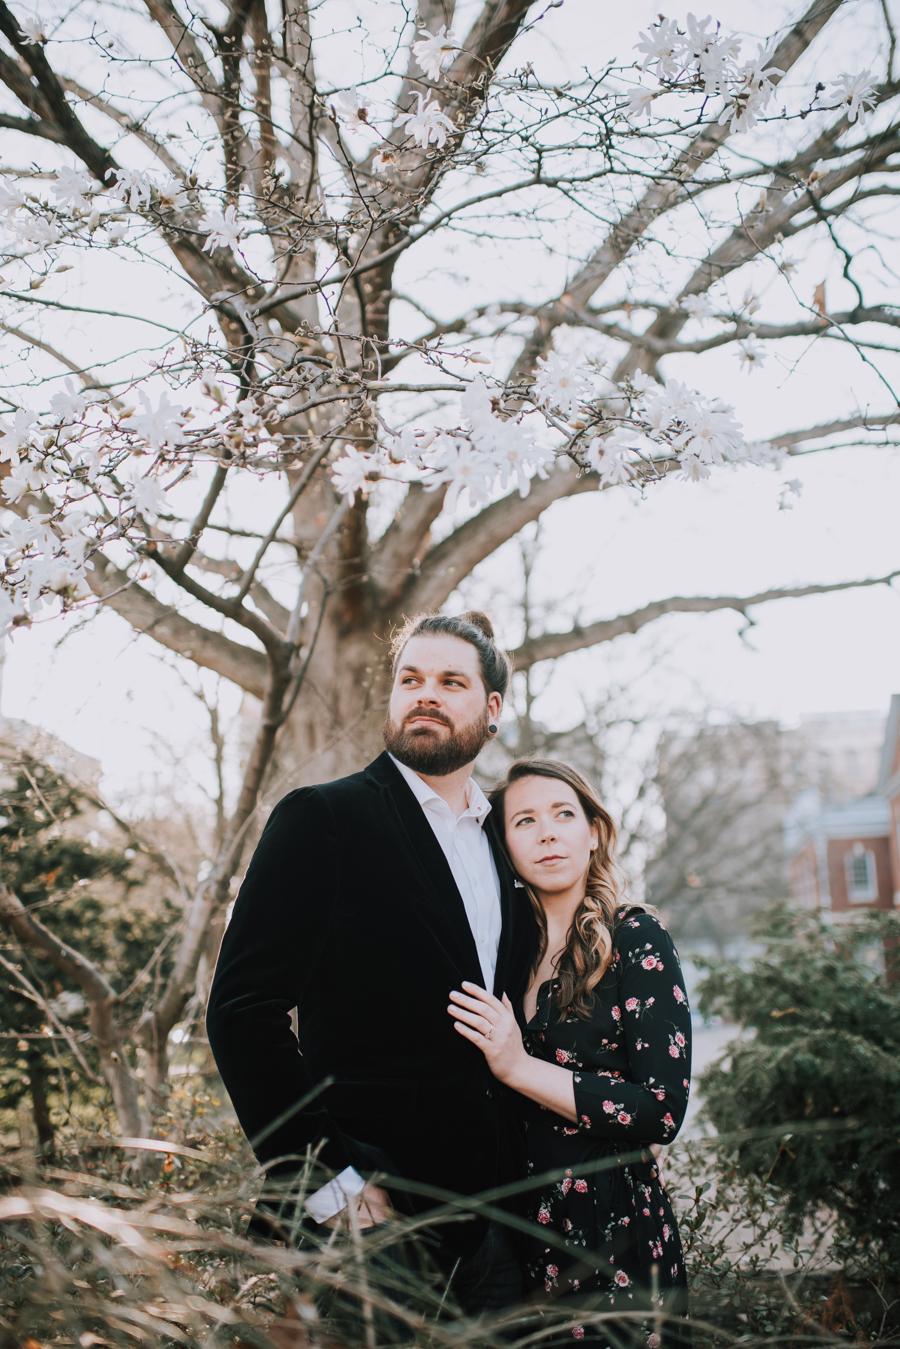 Romantic Old City Engagement Session by MLE Pictures Philly In Love Philadelphia Weddings Venues Vendors